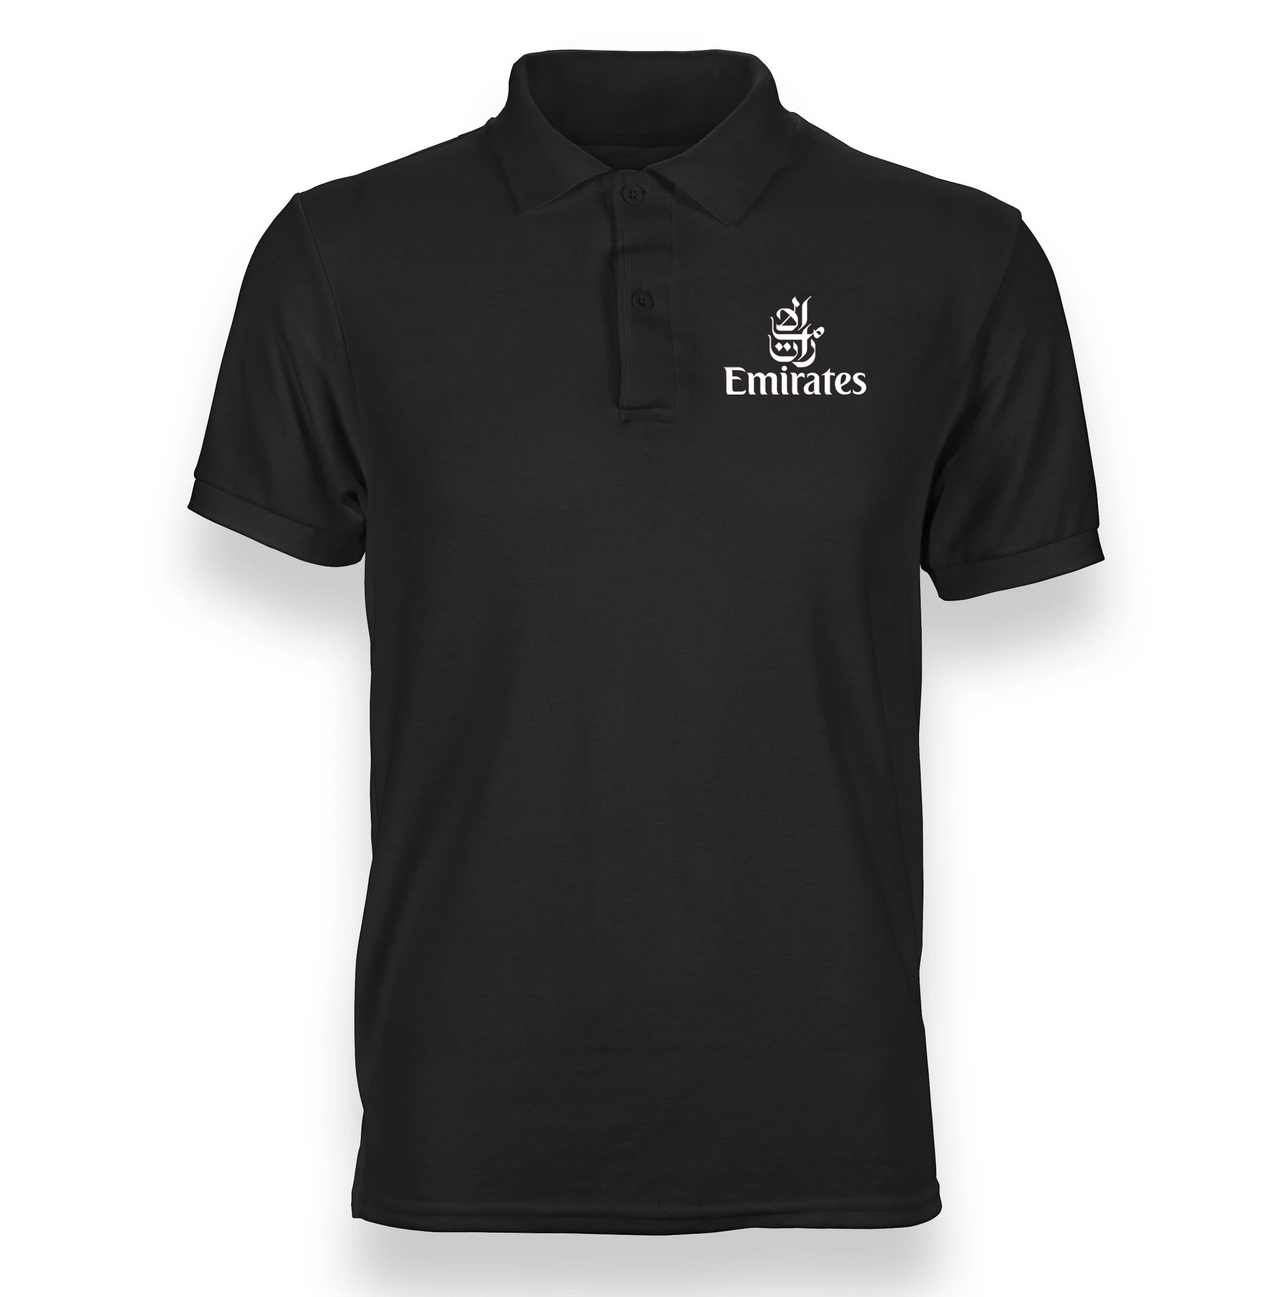 EMIRATES AIRLINES POLO T-SHIRT